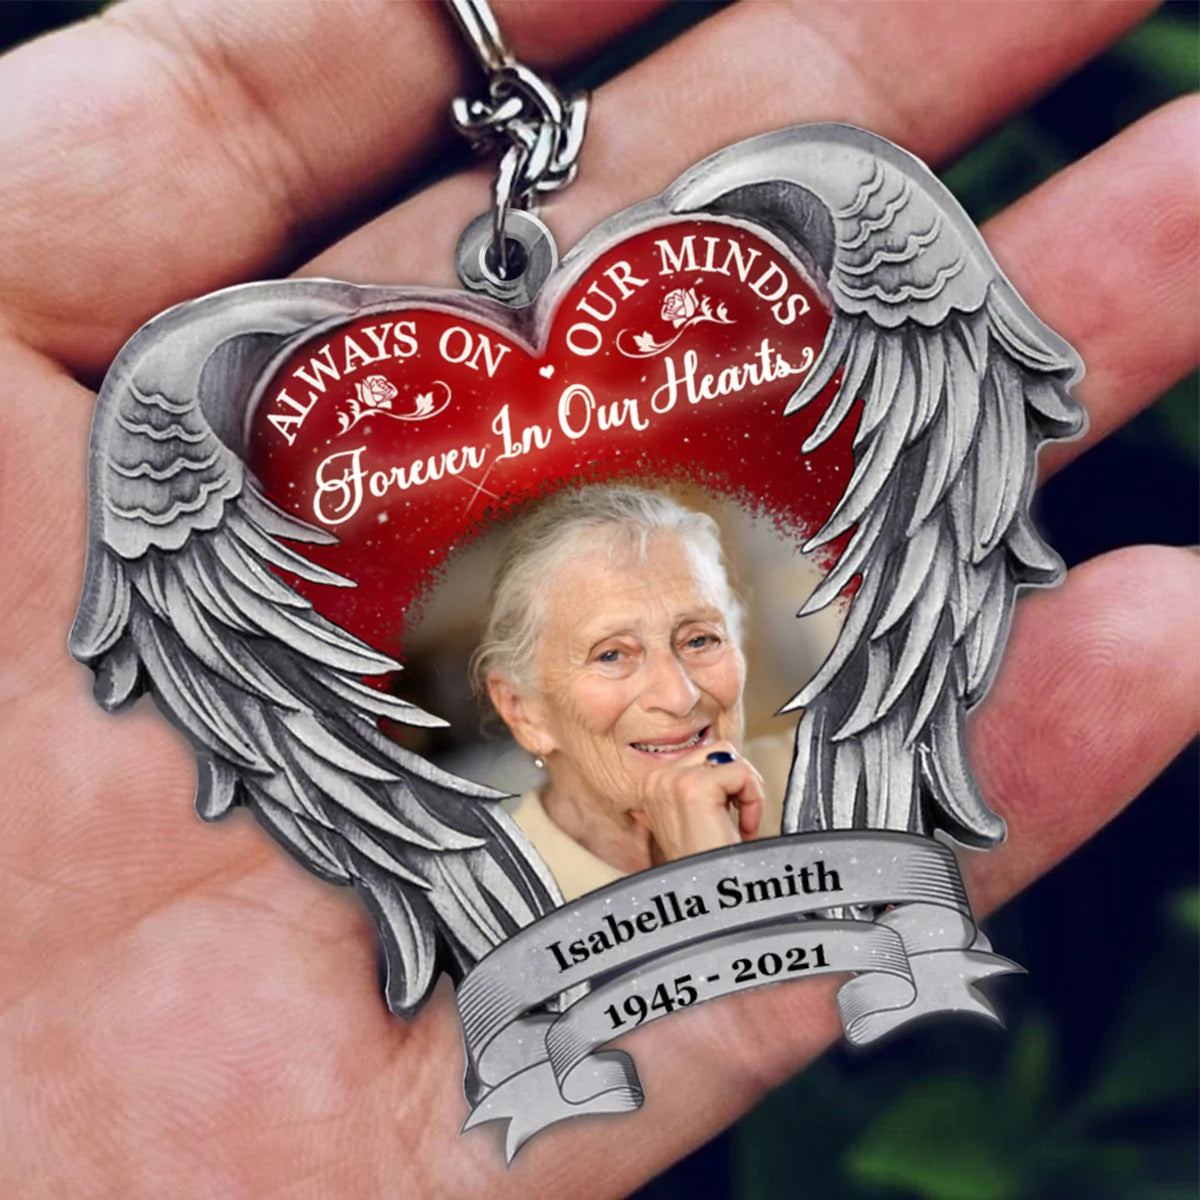 Personalized Memorial Keychain Remembrance Keychain Always On Our Minds/ Forever In Our Hearts